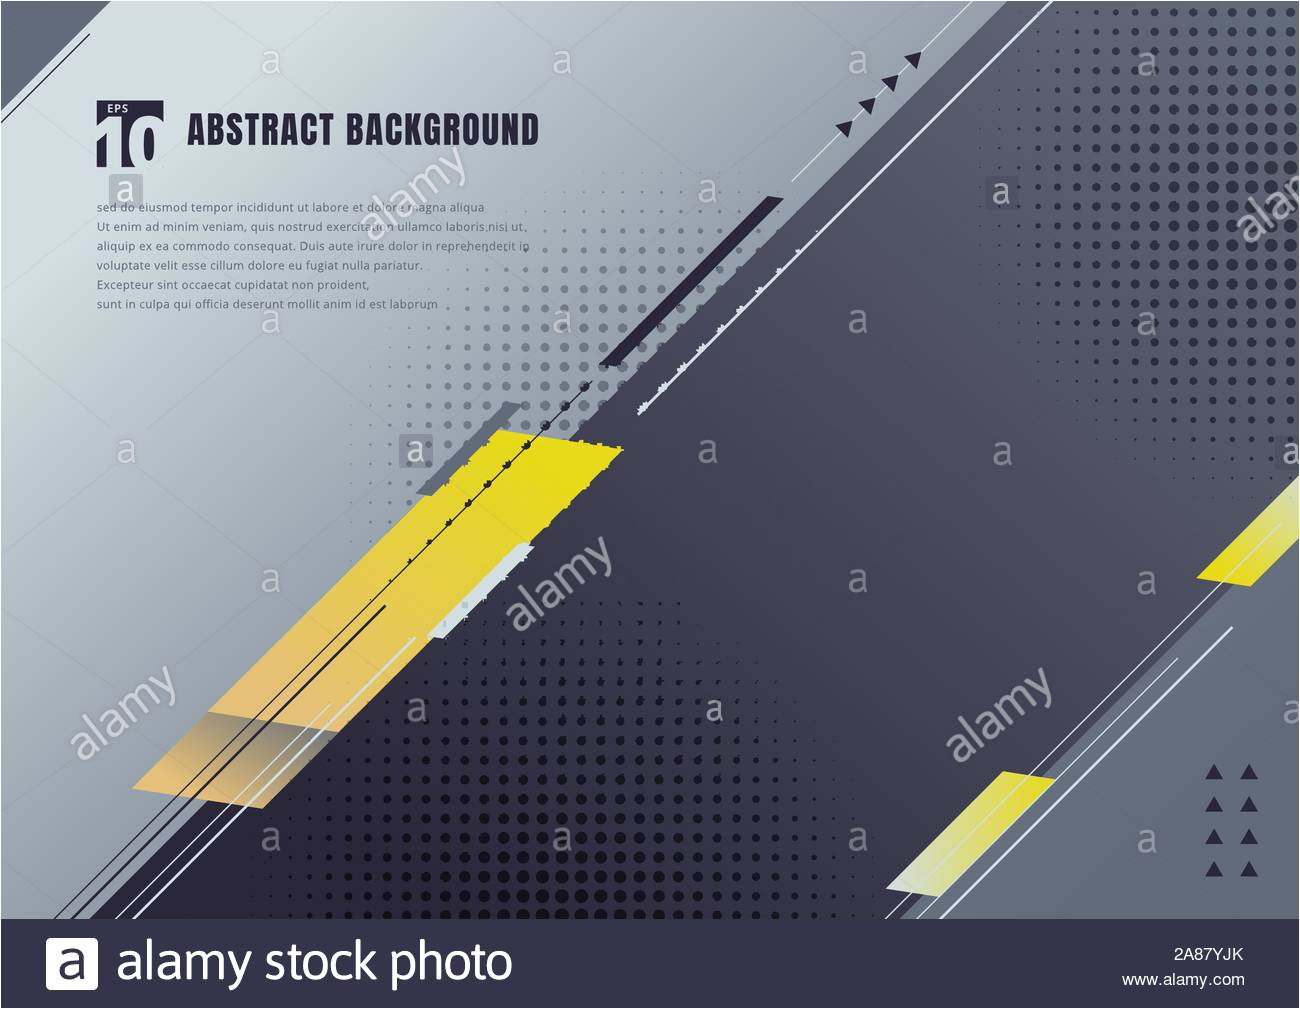 abstract template geometric diagonal elements background blue yellow and black oblique lines and triangles vector illustration 2a87yjk jpg